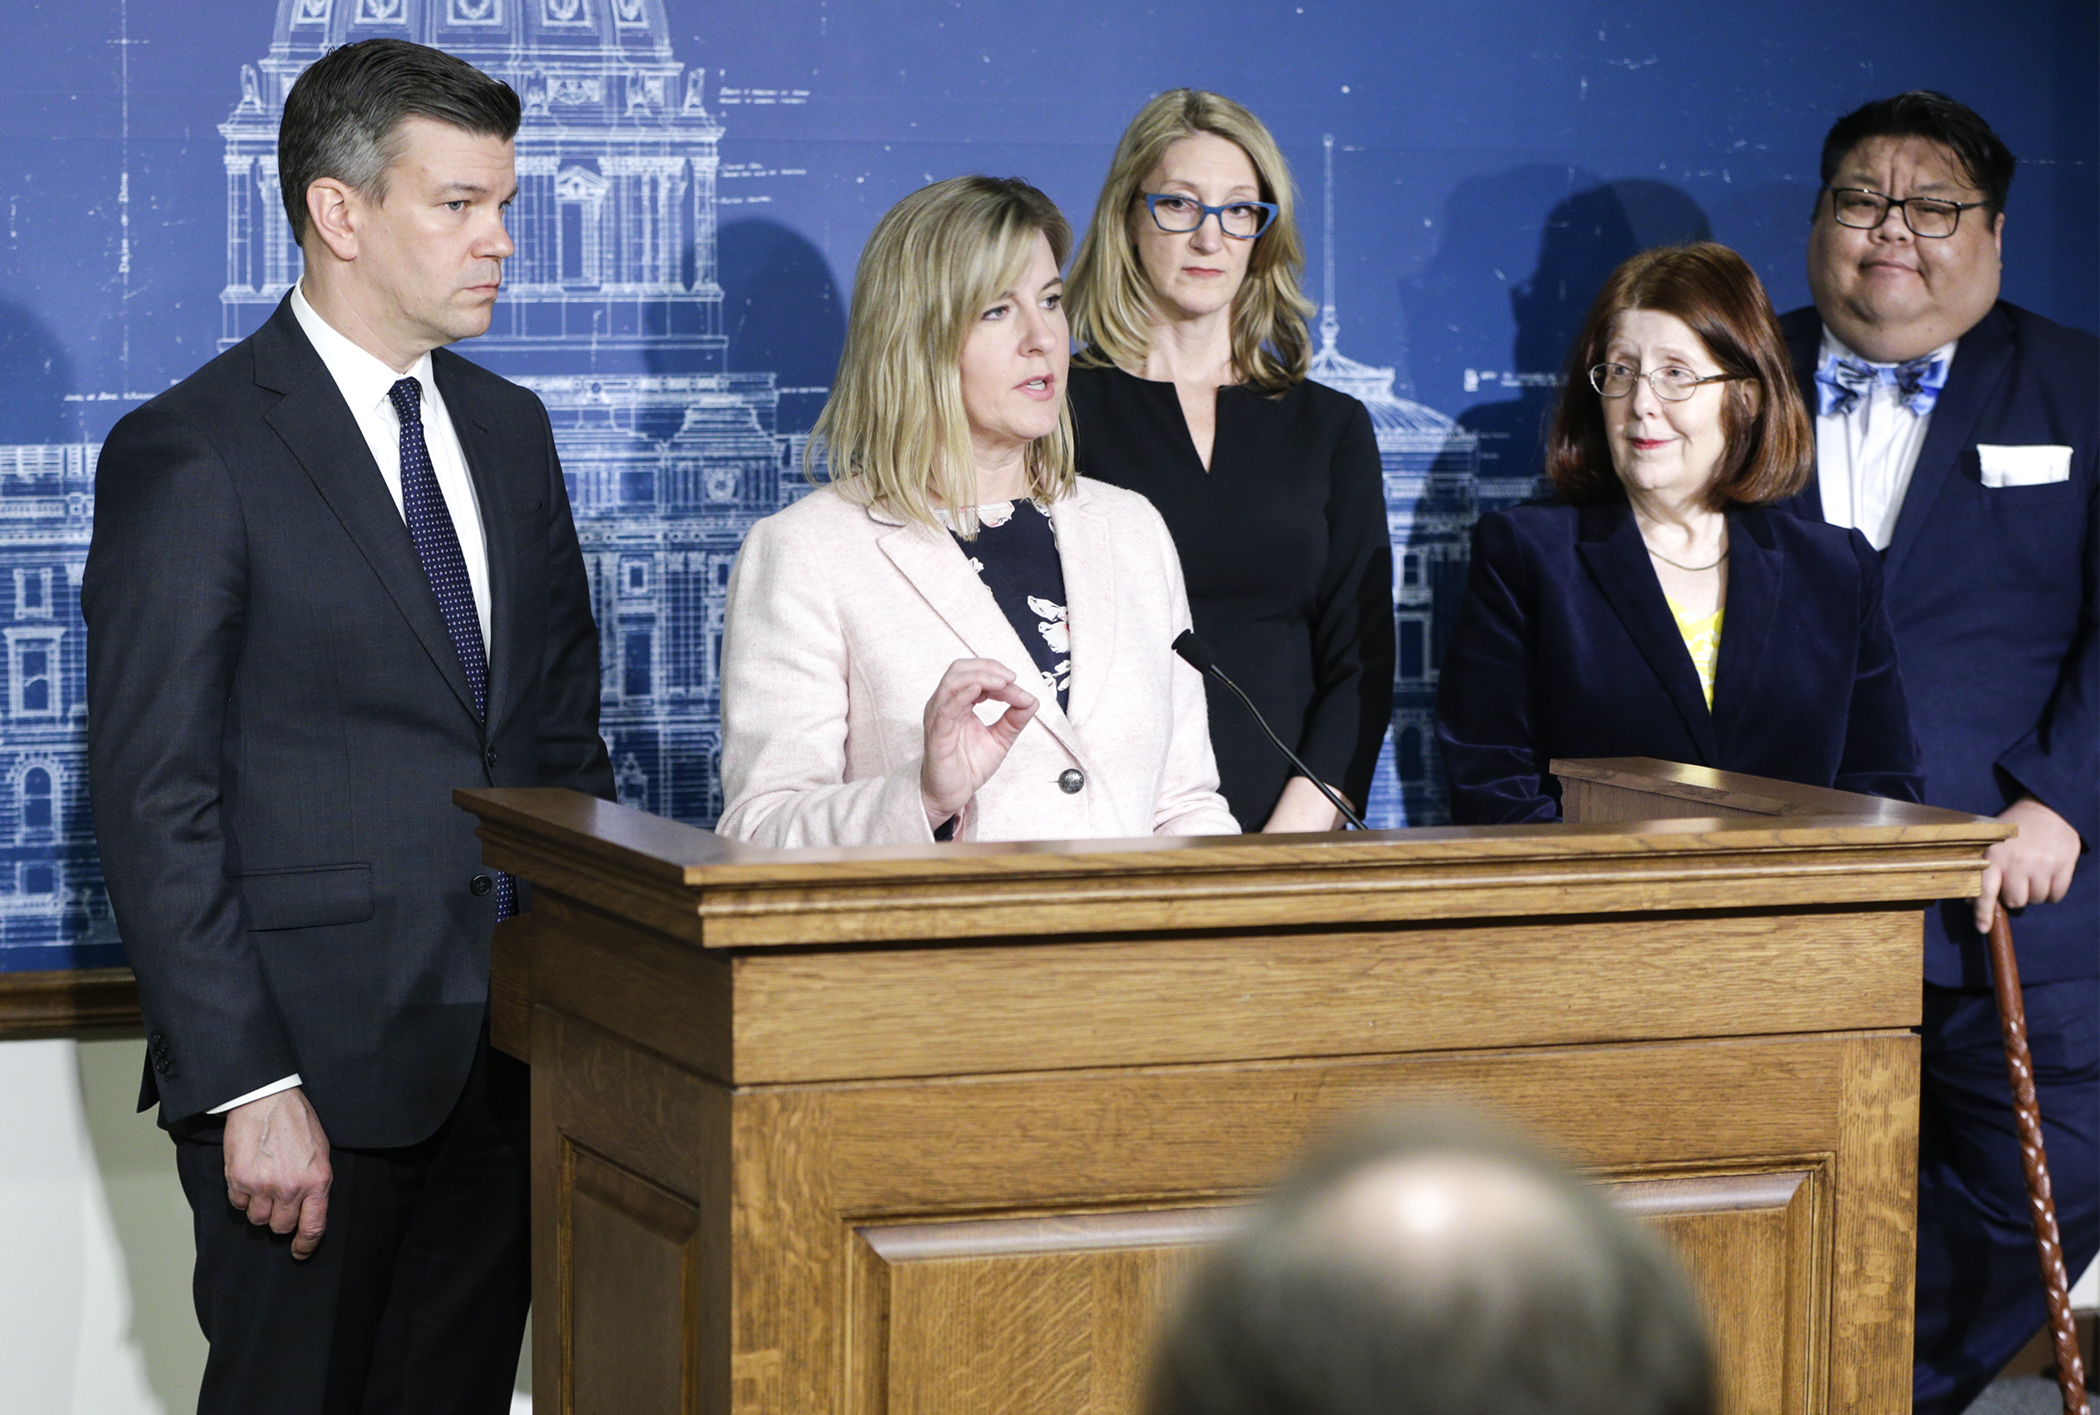 Joined by other DFL leaders at a March 11 news conference, House Speaker Melissa Hortman discusses additional COVID-19 preparedness legislation that will be considered by the House. Photo by Paul Battaglia